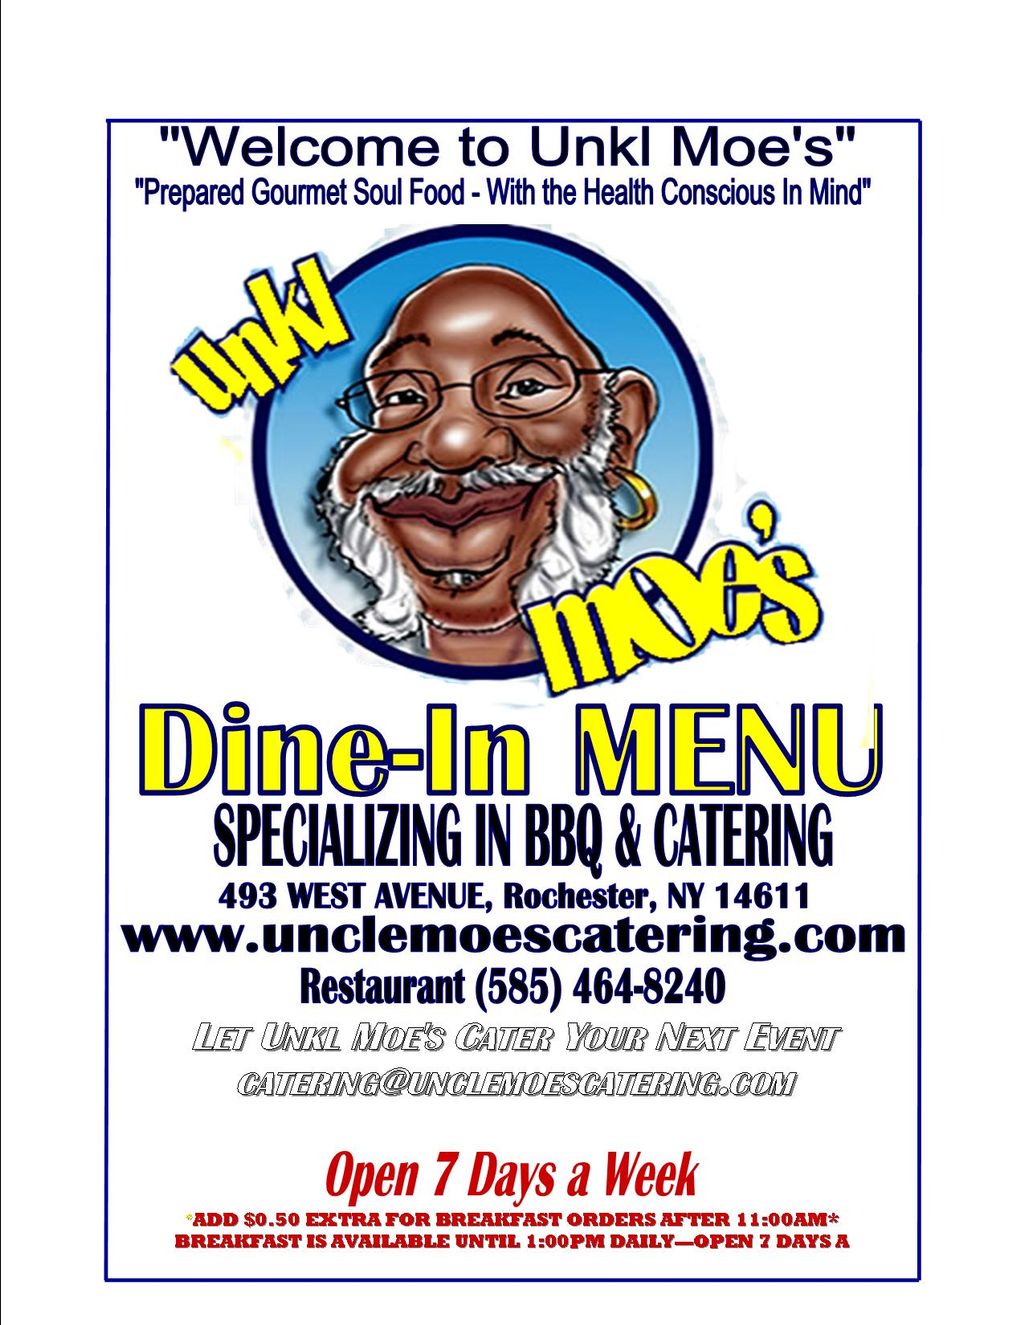 Unkl Moe's BBQ & Catering, Inc.